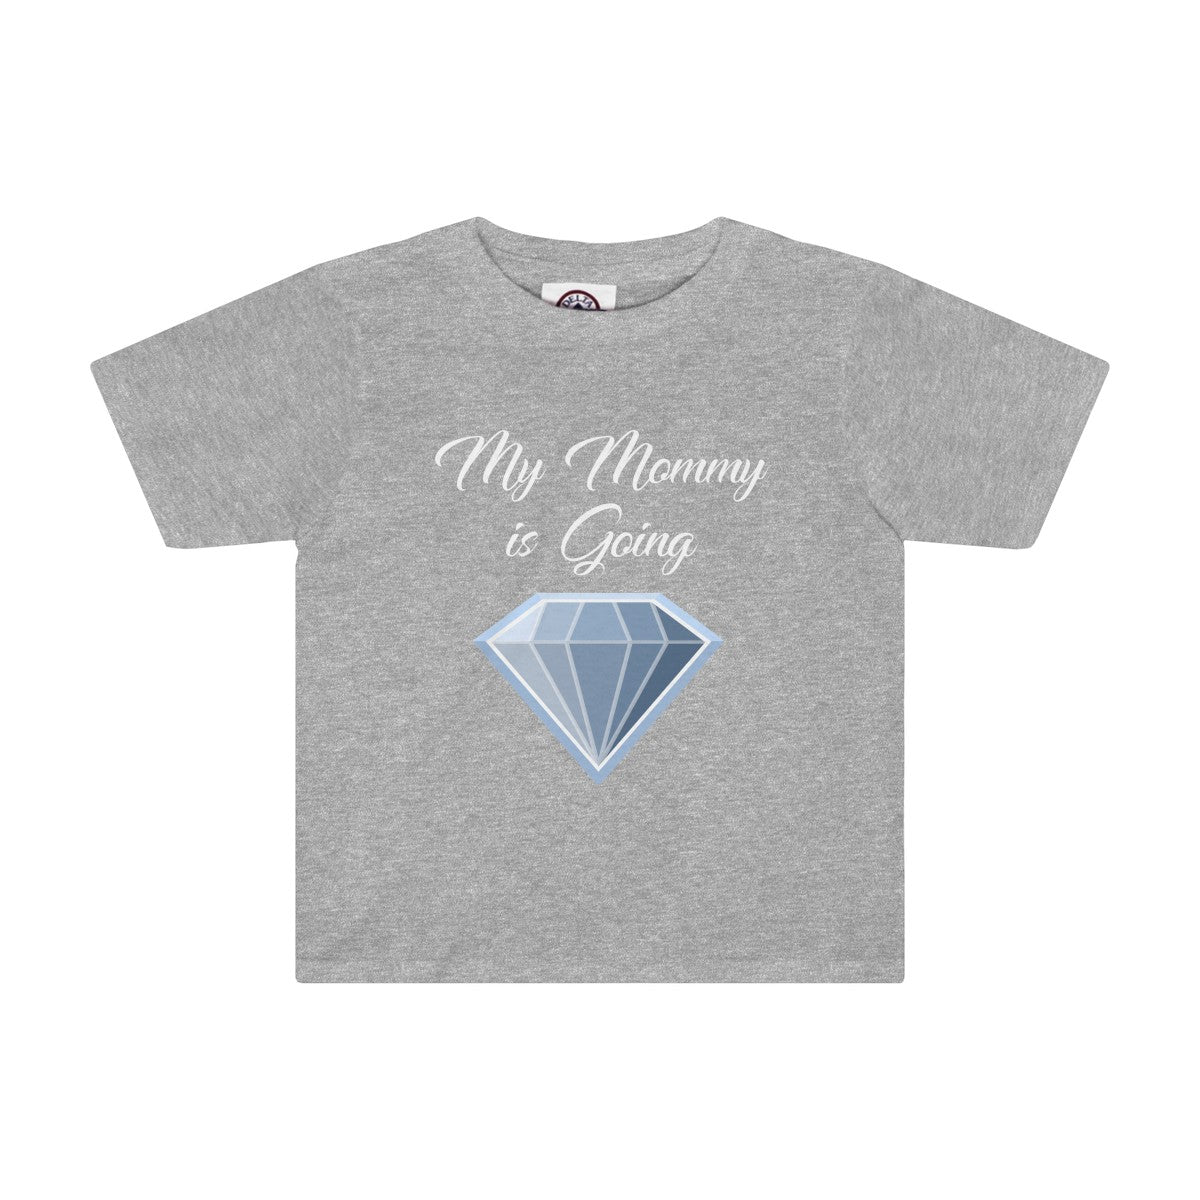 My Mommy is Going Diamond Toddler Tee-Kids clothes-PureDesignTees